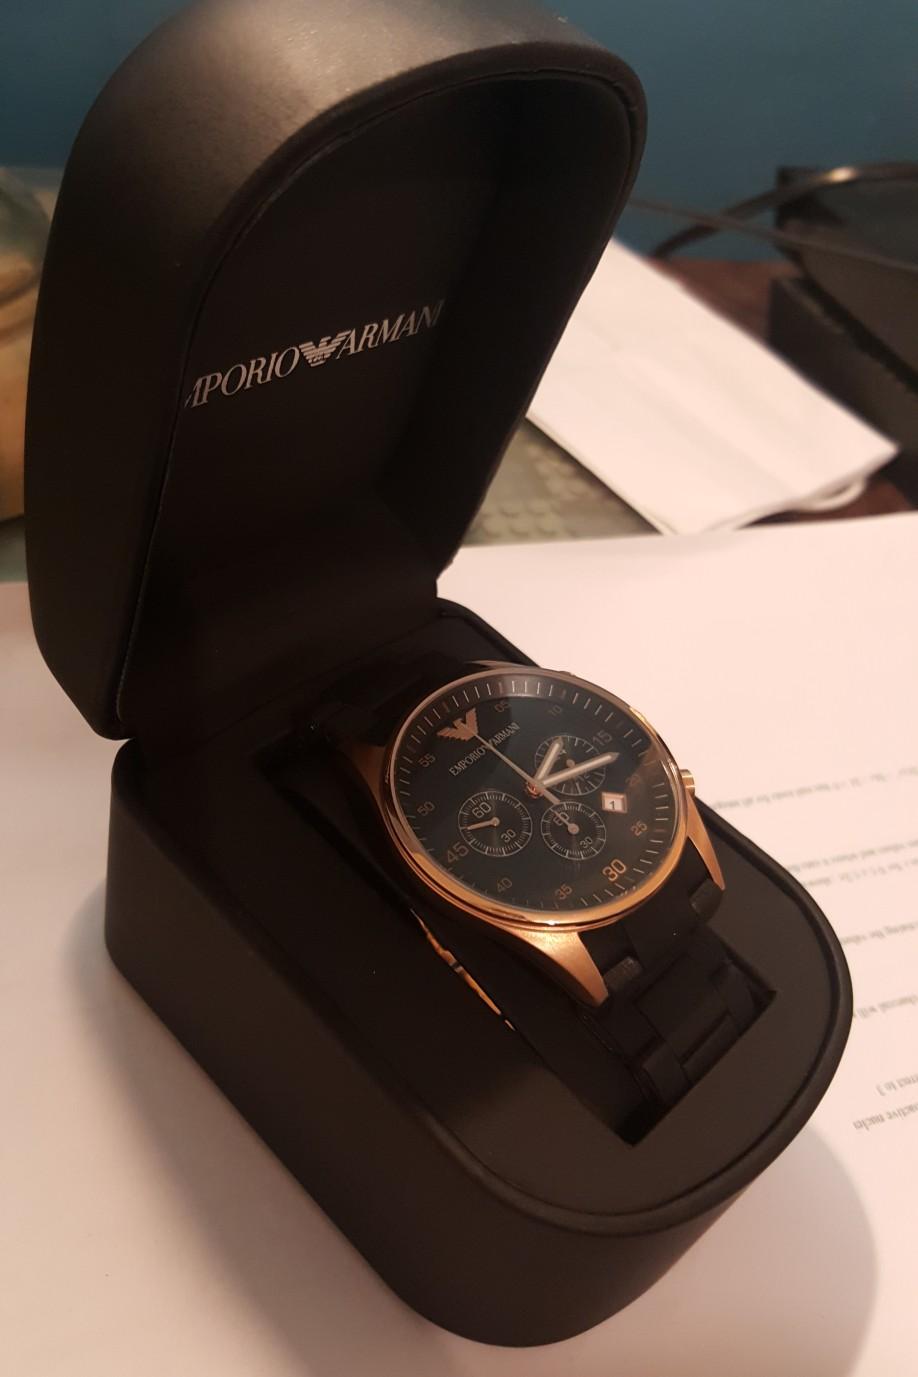 Mens Emporio Armani rose gold watch in 